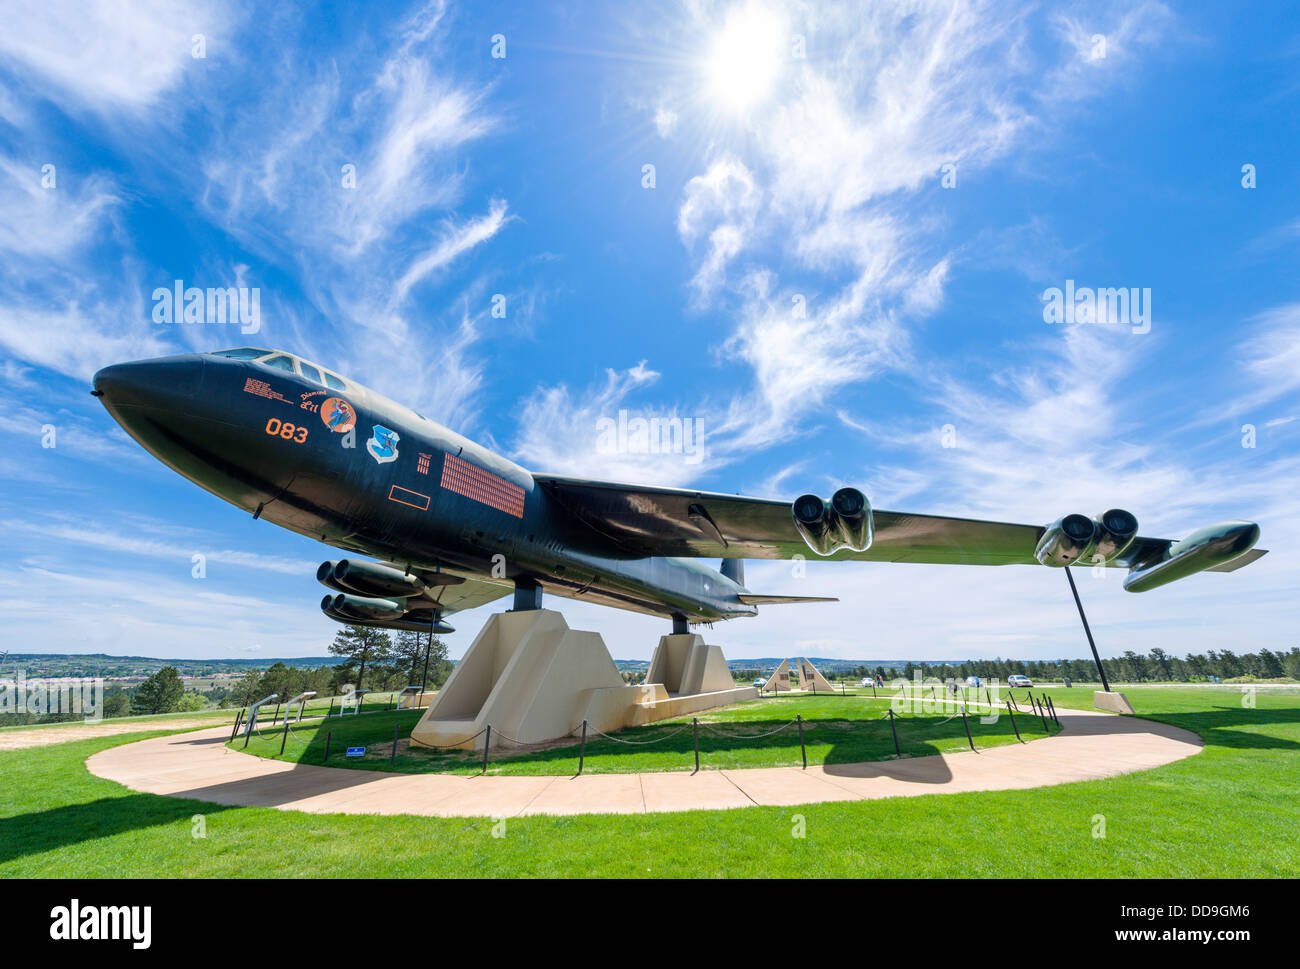 B-52D Bomber an der United States Air Force Academy in Colorado Springs, Colorado, USA Stockfoto